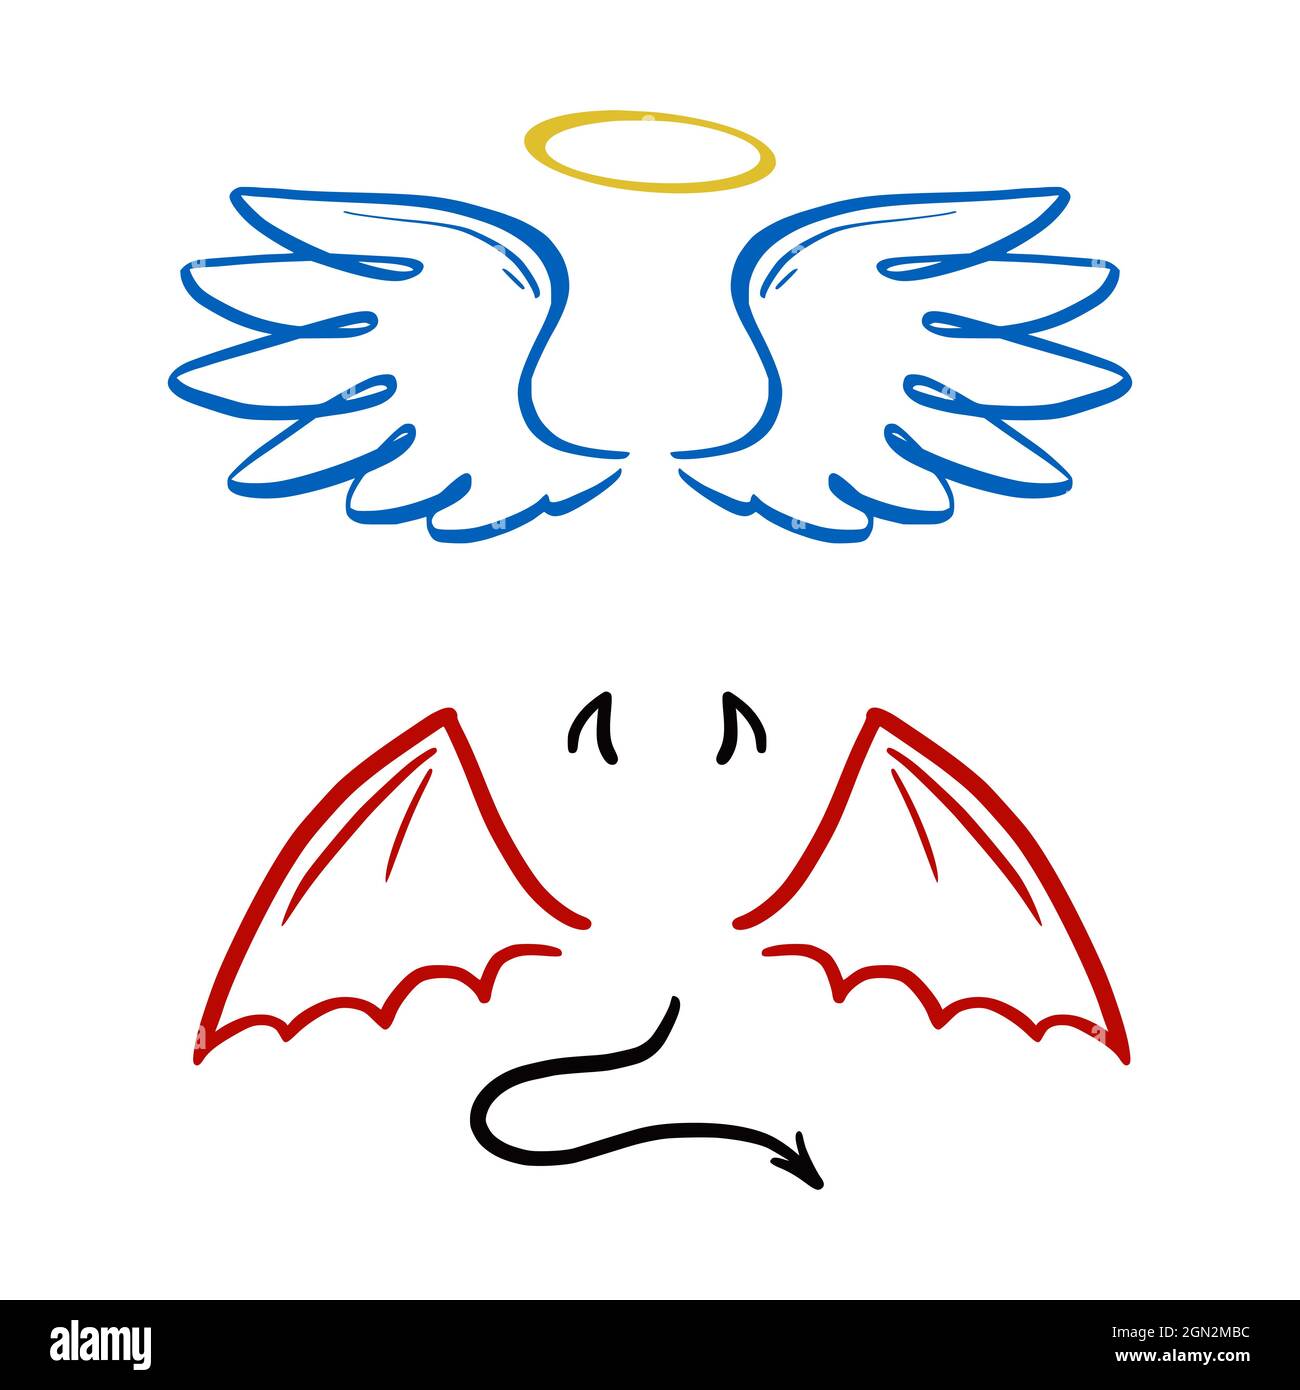 Angel and devil stylized vector illustration. Angel with wing, halo. Devil with wing and tail. Hand drawn line sketch style. Stock Vector